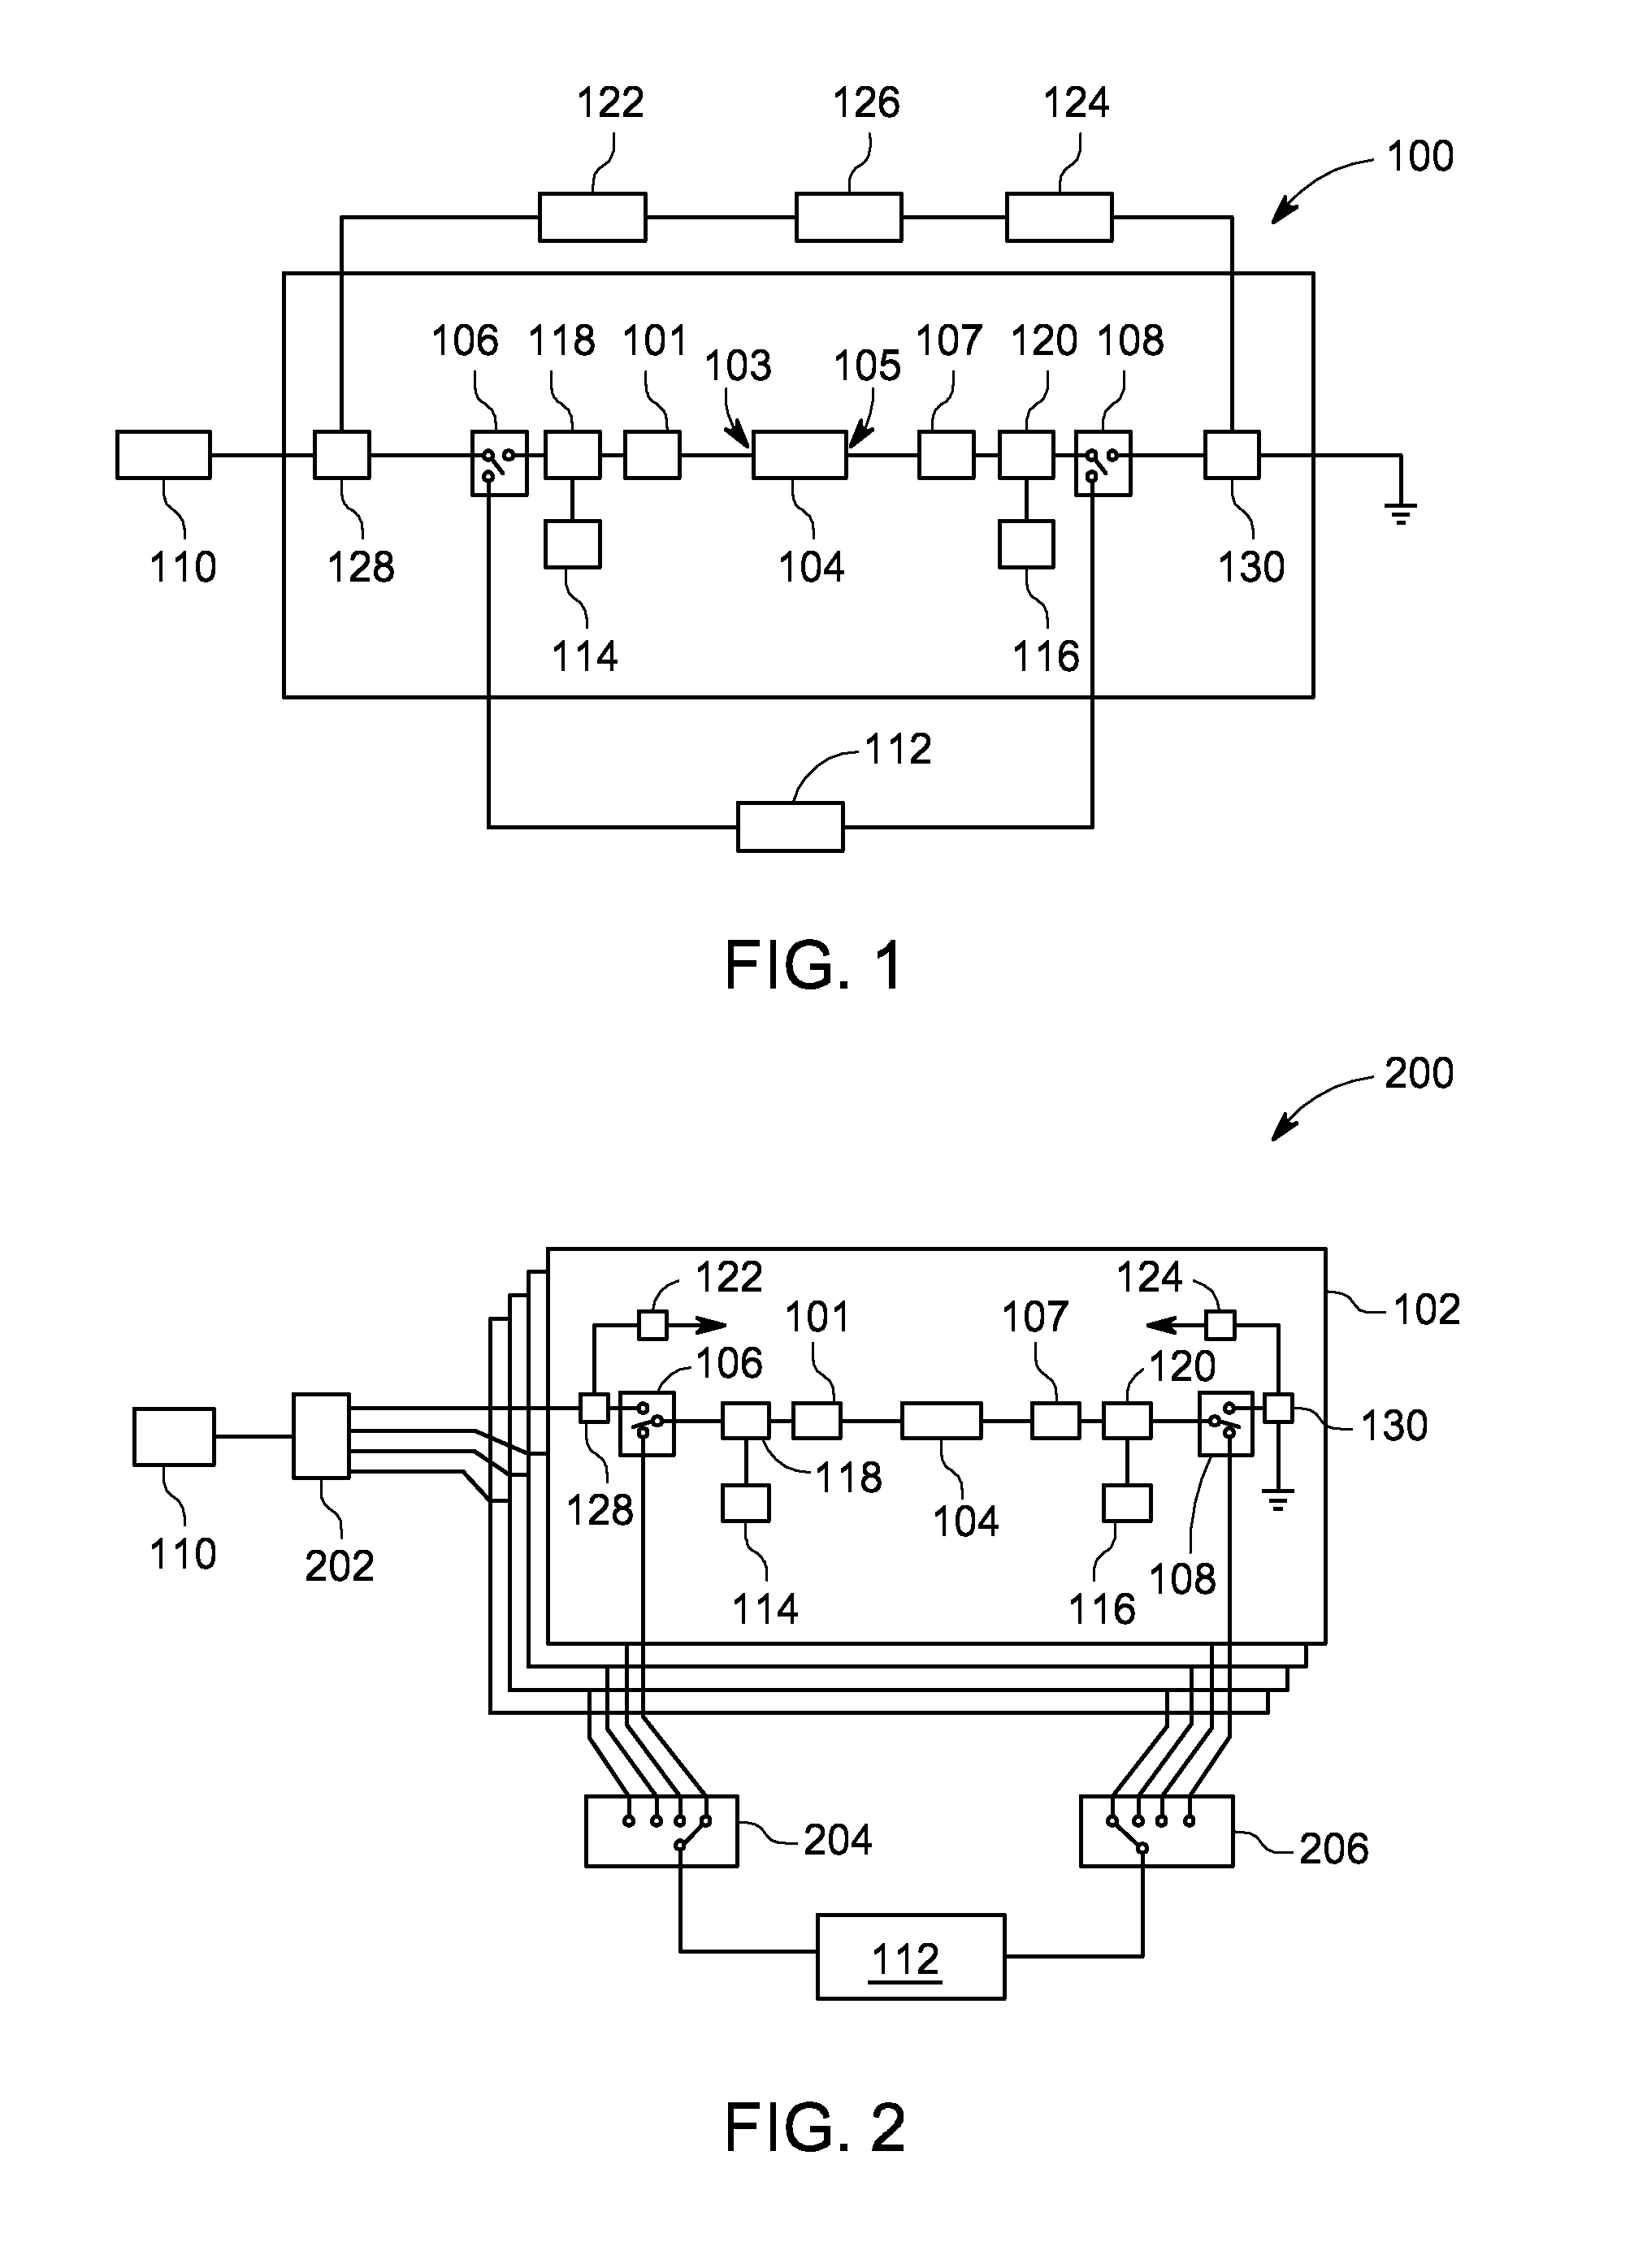 Method and apparatus for accelerating device degradation and diagnosing the physical changes of the device during the degradation process